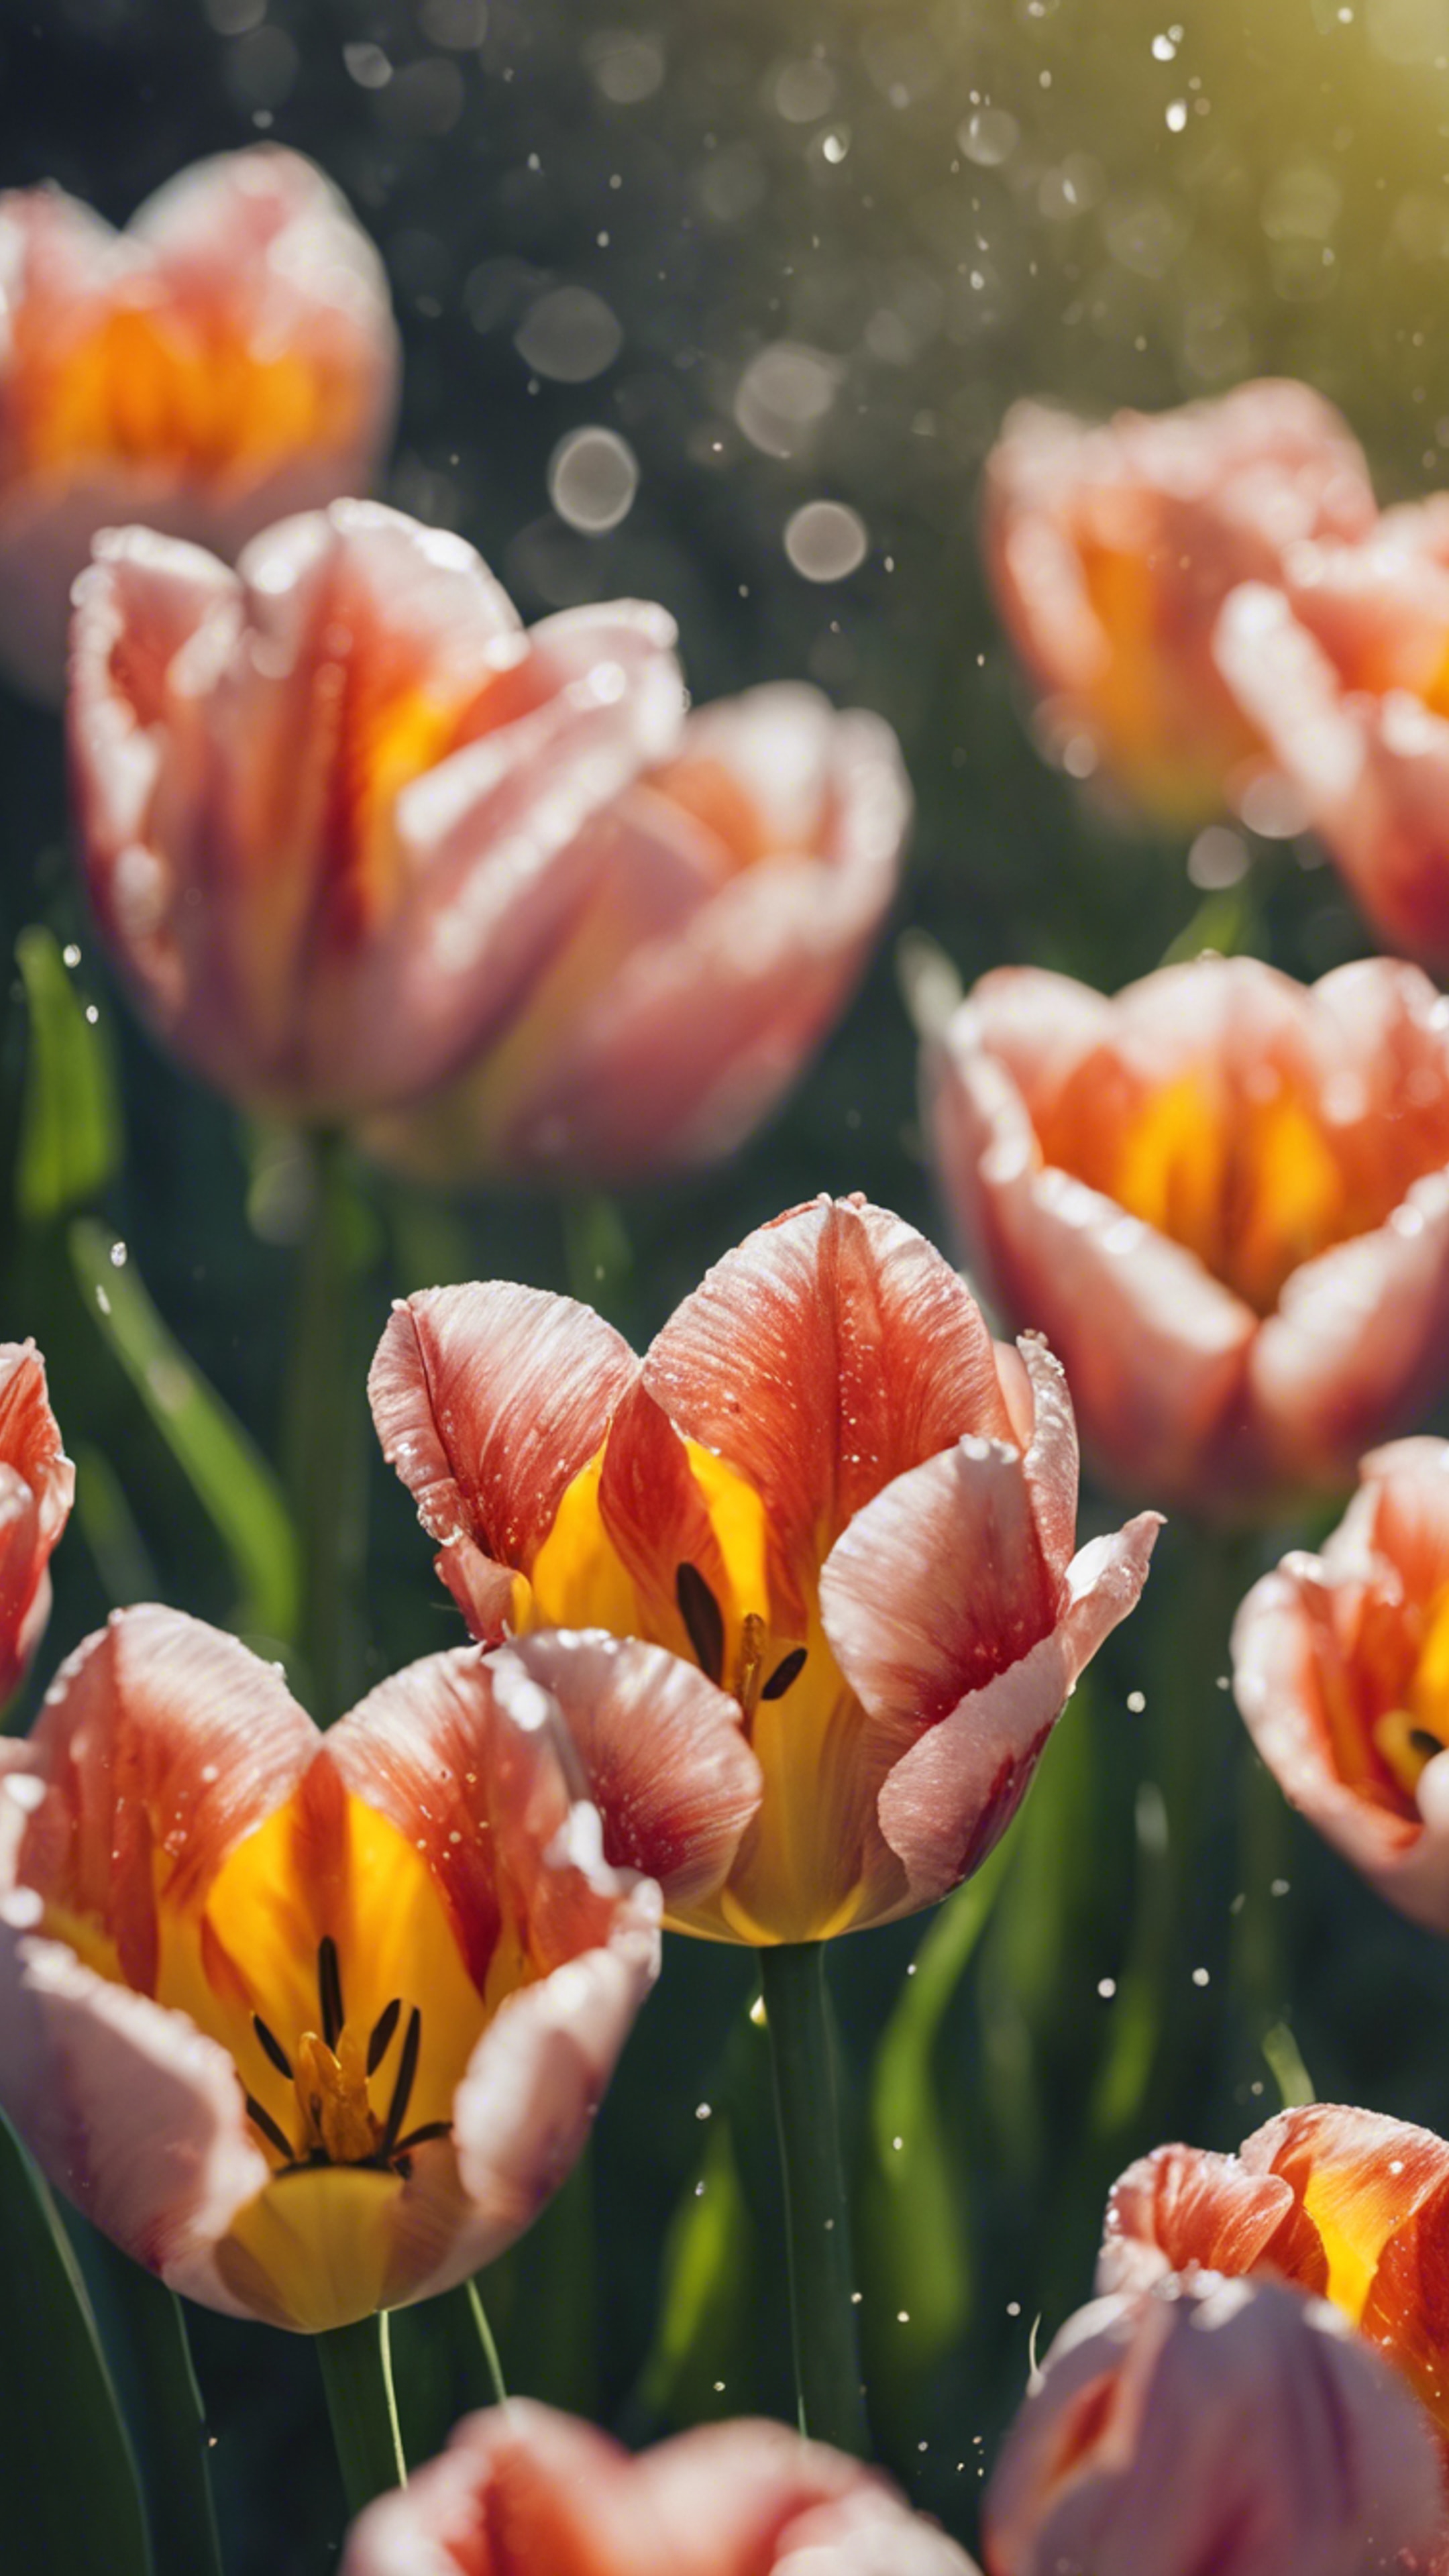 A close-up image of dew-speckled tulip petals opening to the warmth of a mild spring morning. Tapet[e13c163b065d4542a7e5]